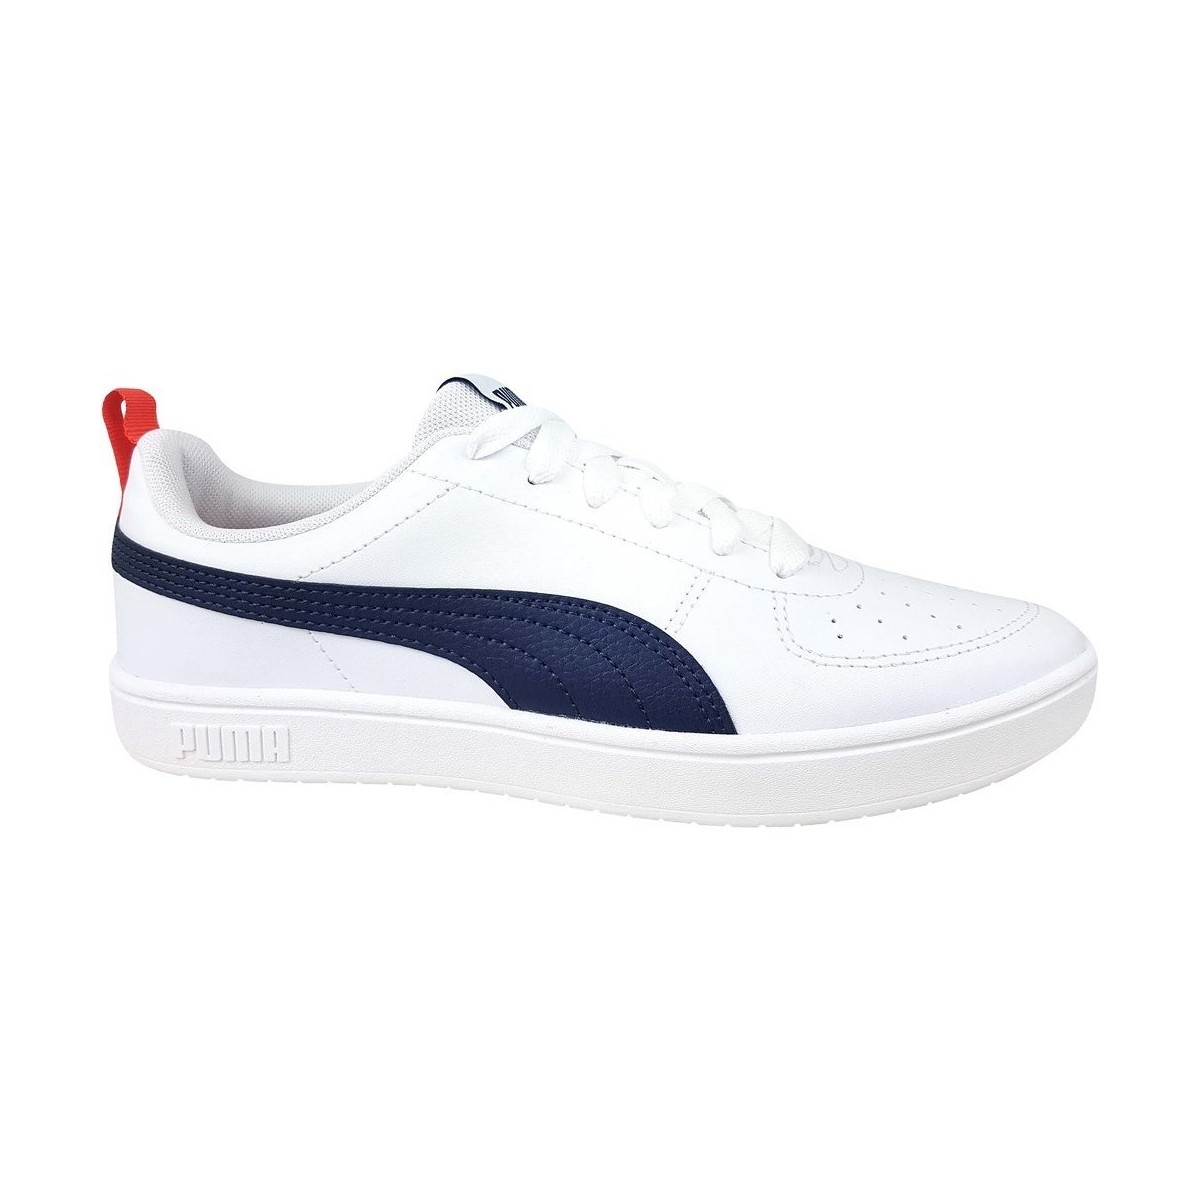 puma  rickie jr  boys's children's shoes (trainers) in white